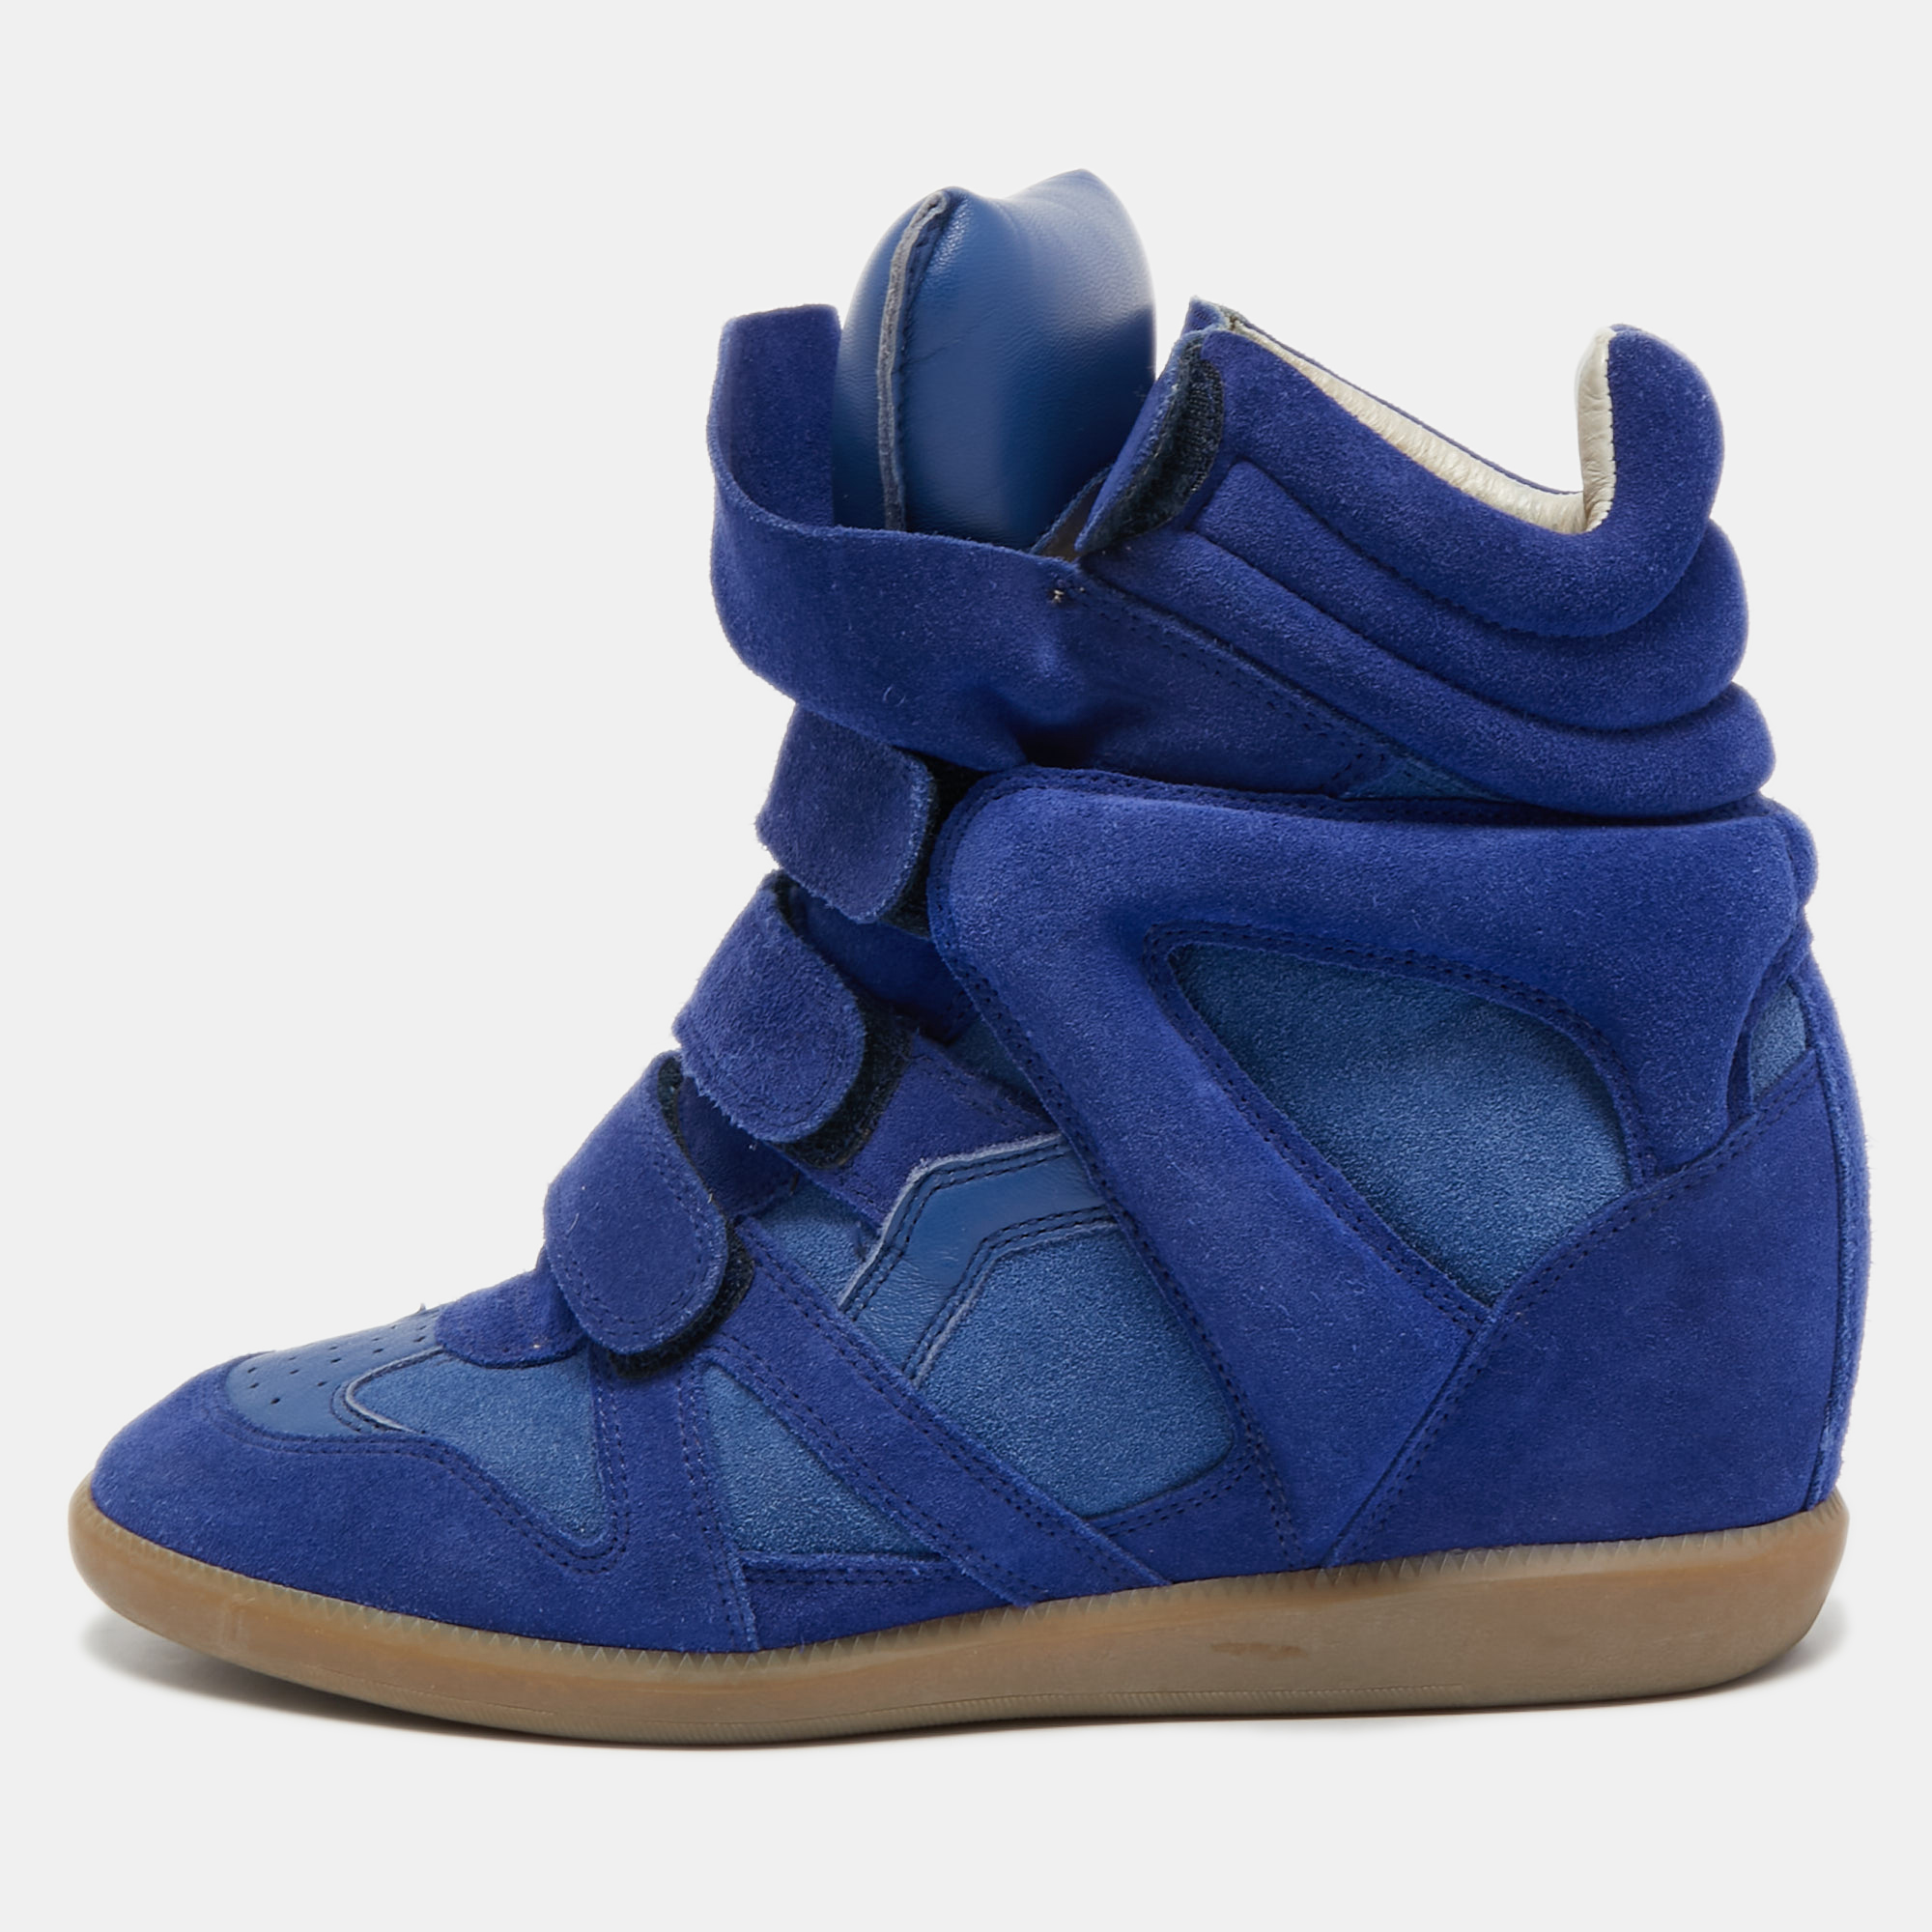 Pre-owned Isabel Marant Blue Suede And Leather Beckett Wedge Sneakers Size 39